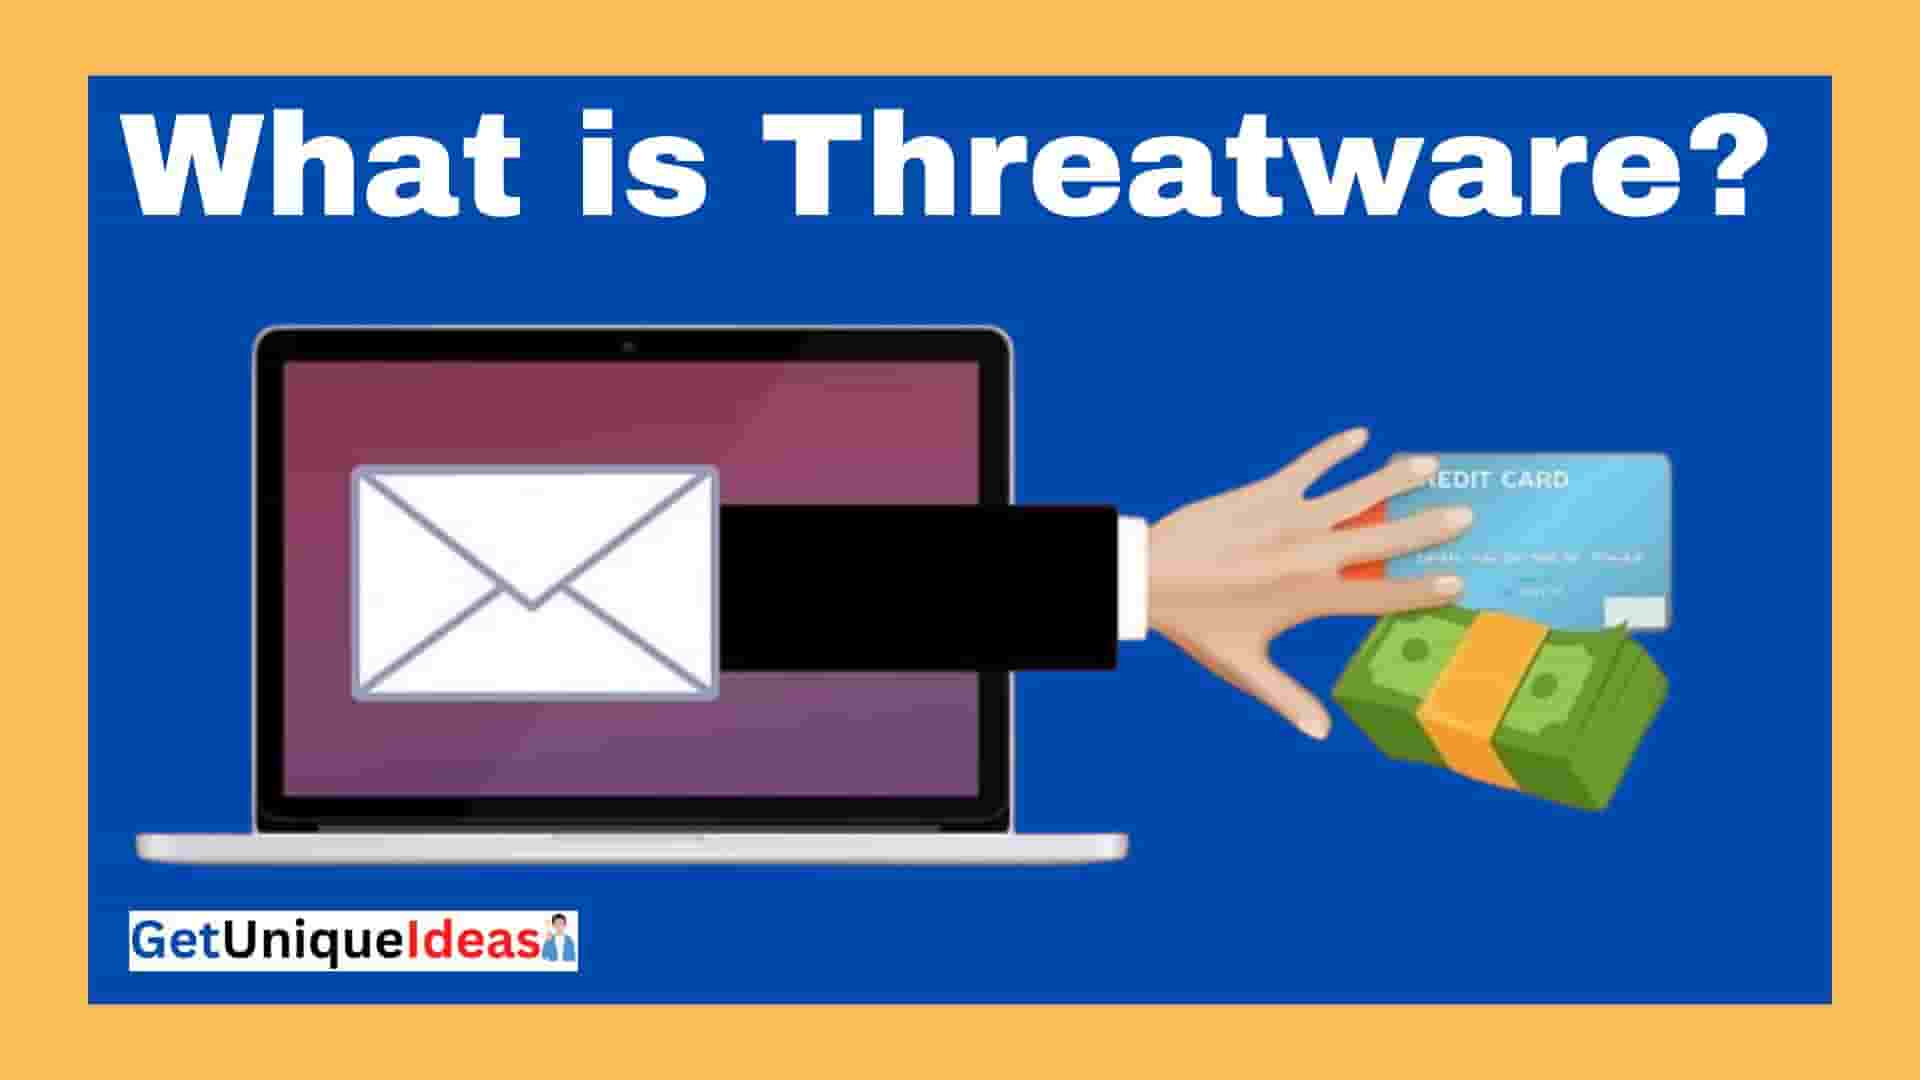 What is Threatware?